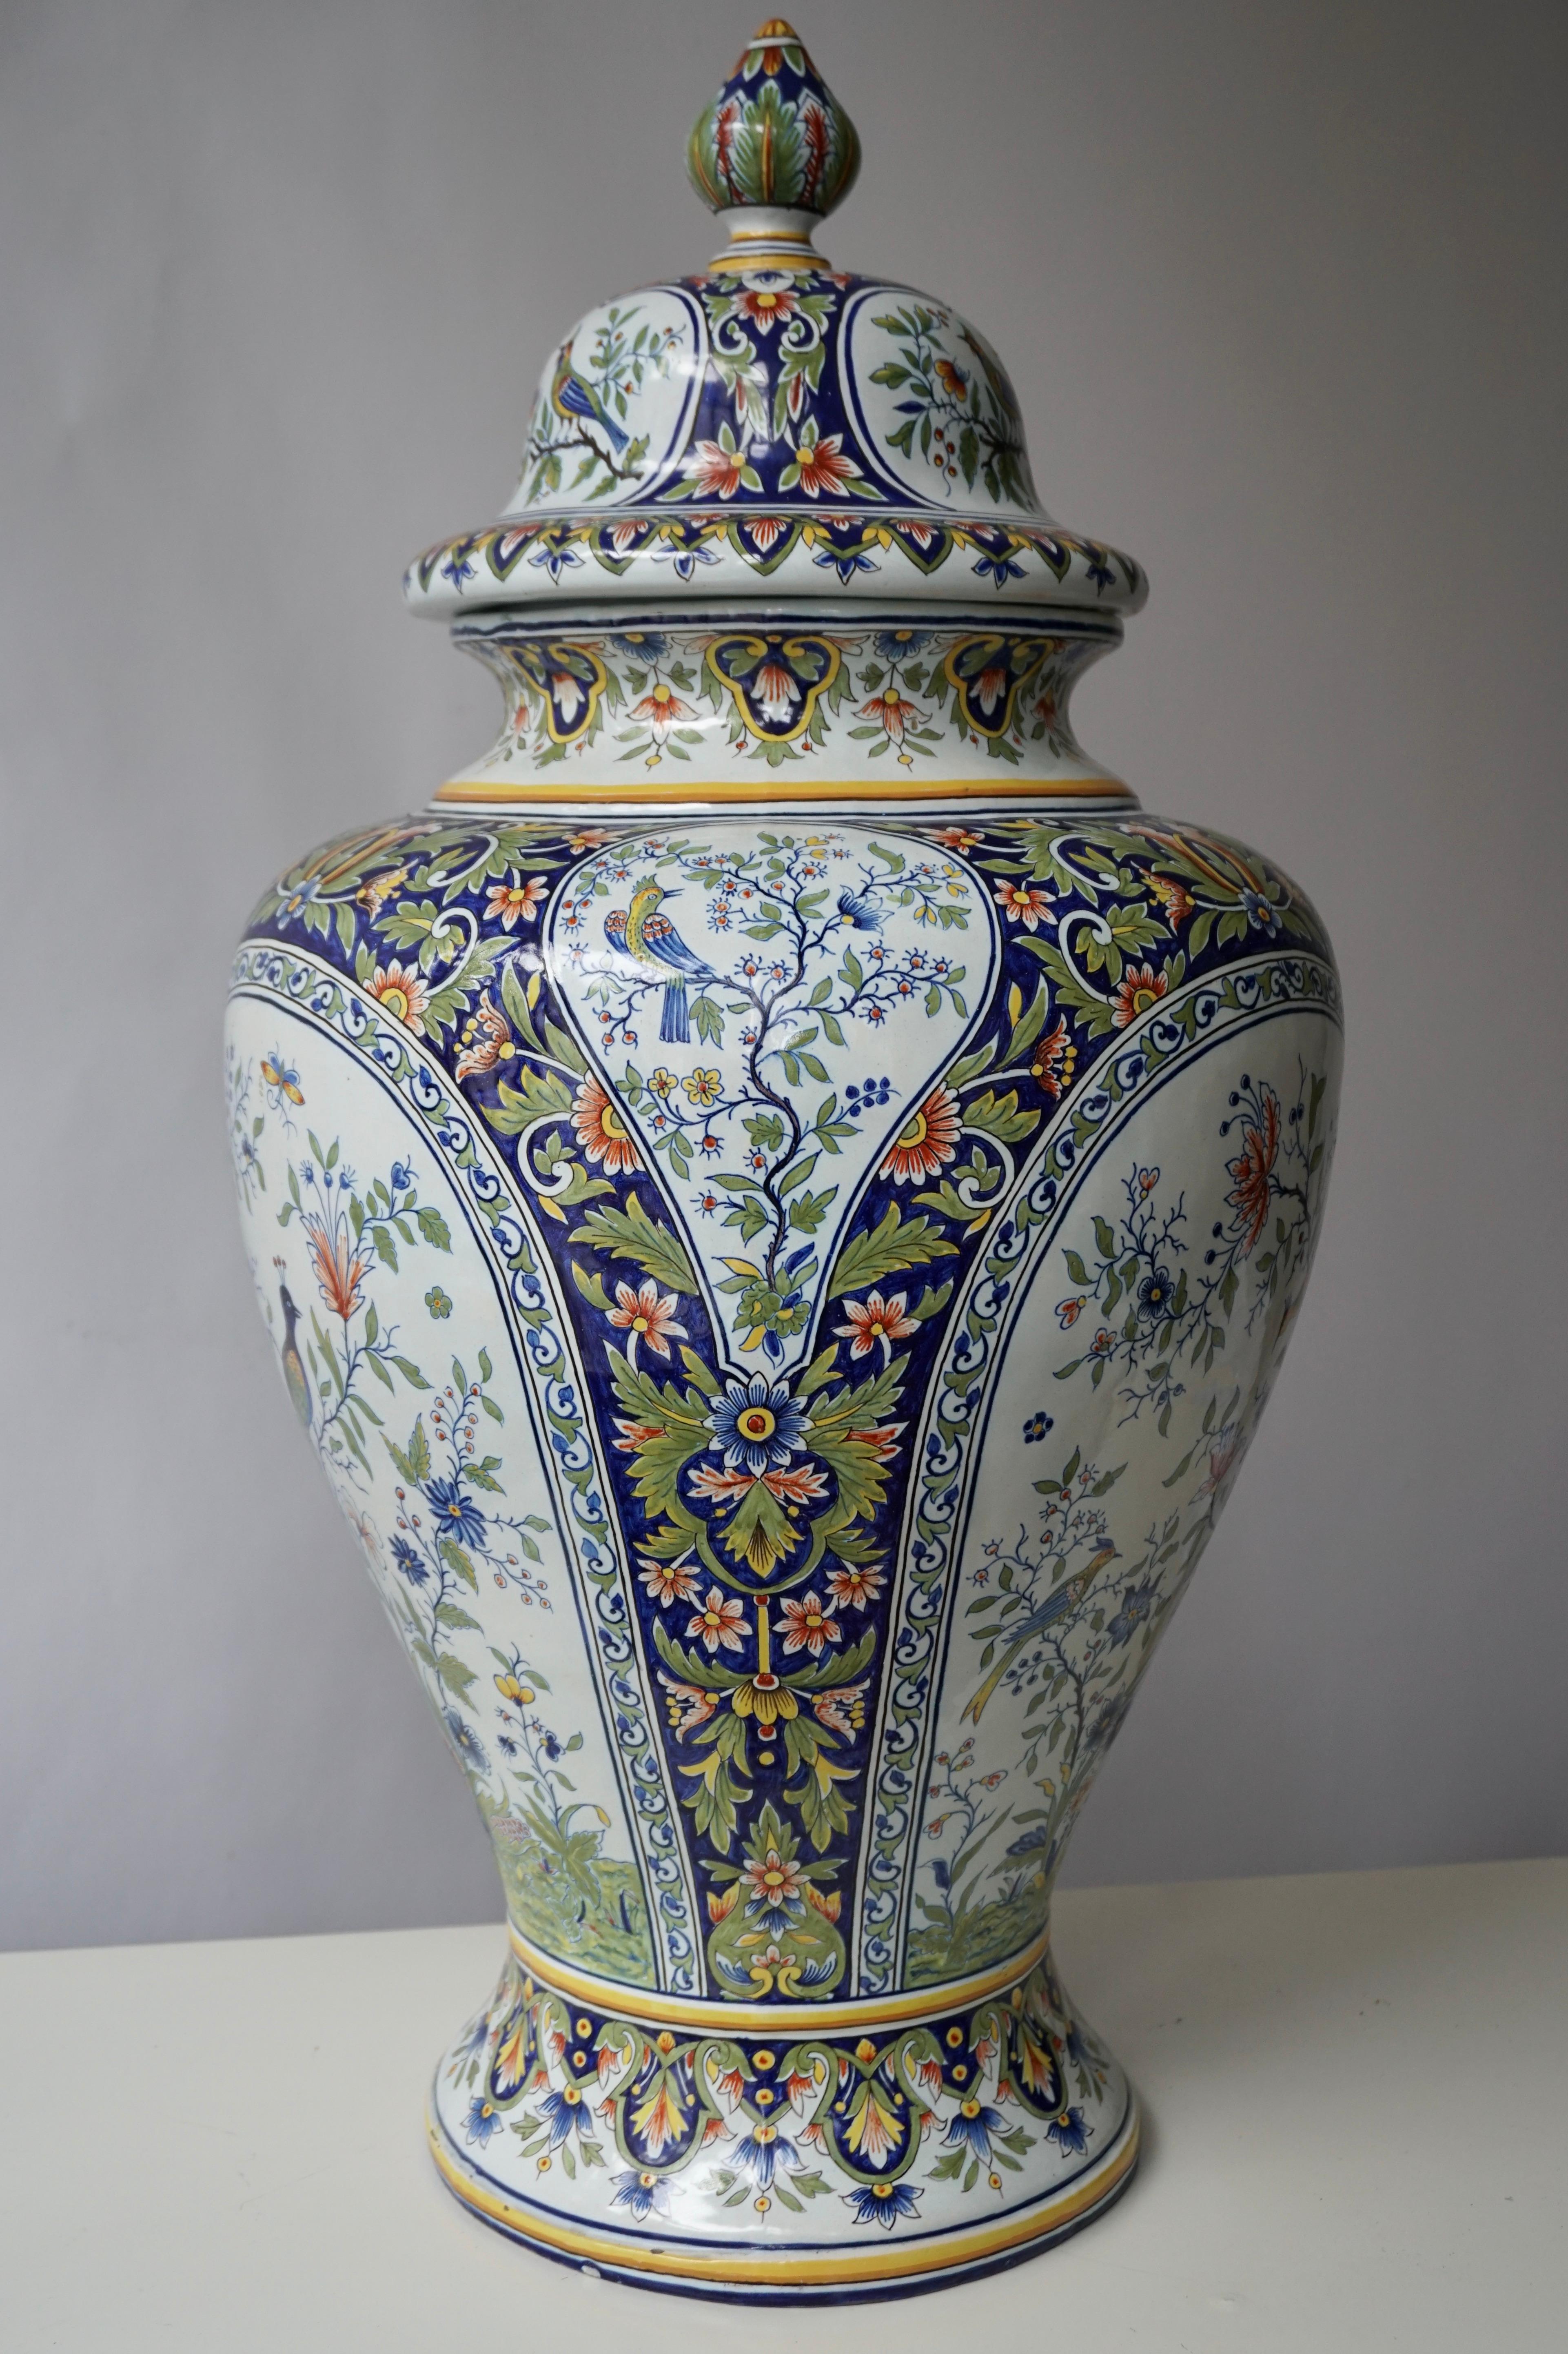 Hollywood Regency French Hand Painted Faience Urn or Vase with Flowers and Birds Motifs